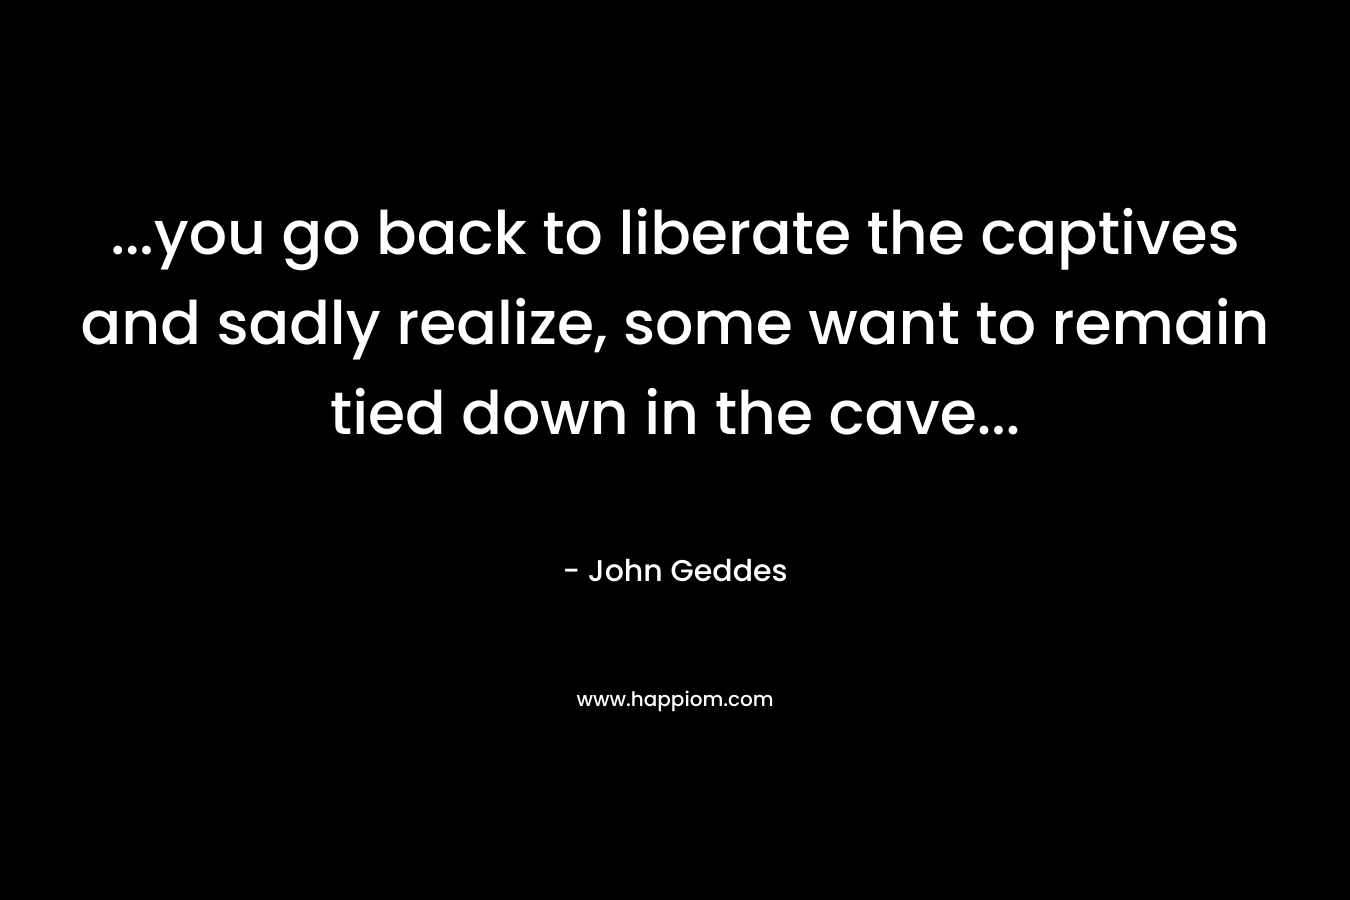 ...you go back to liberate the captives and sadly realize, some want to remain tied down in the cave...